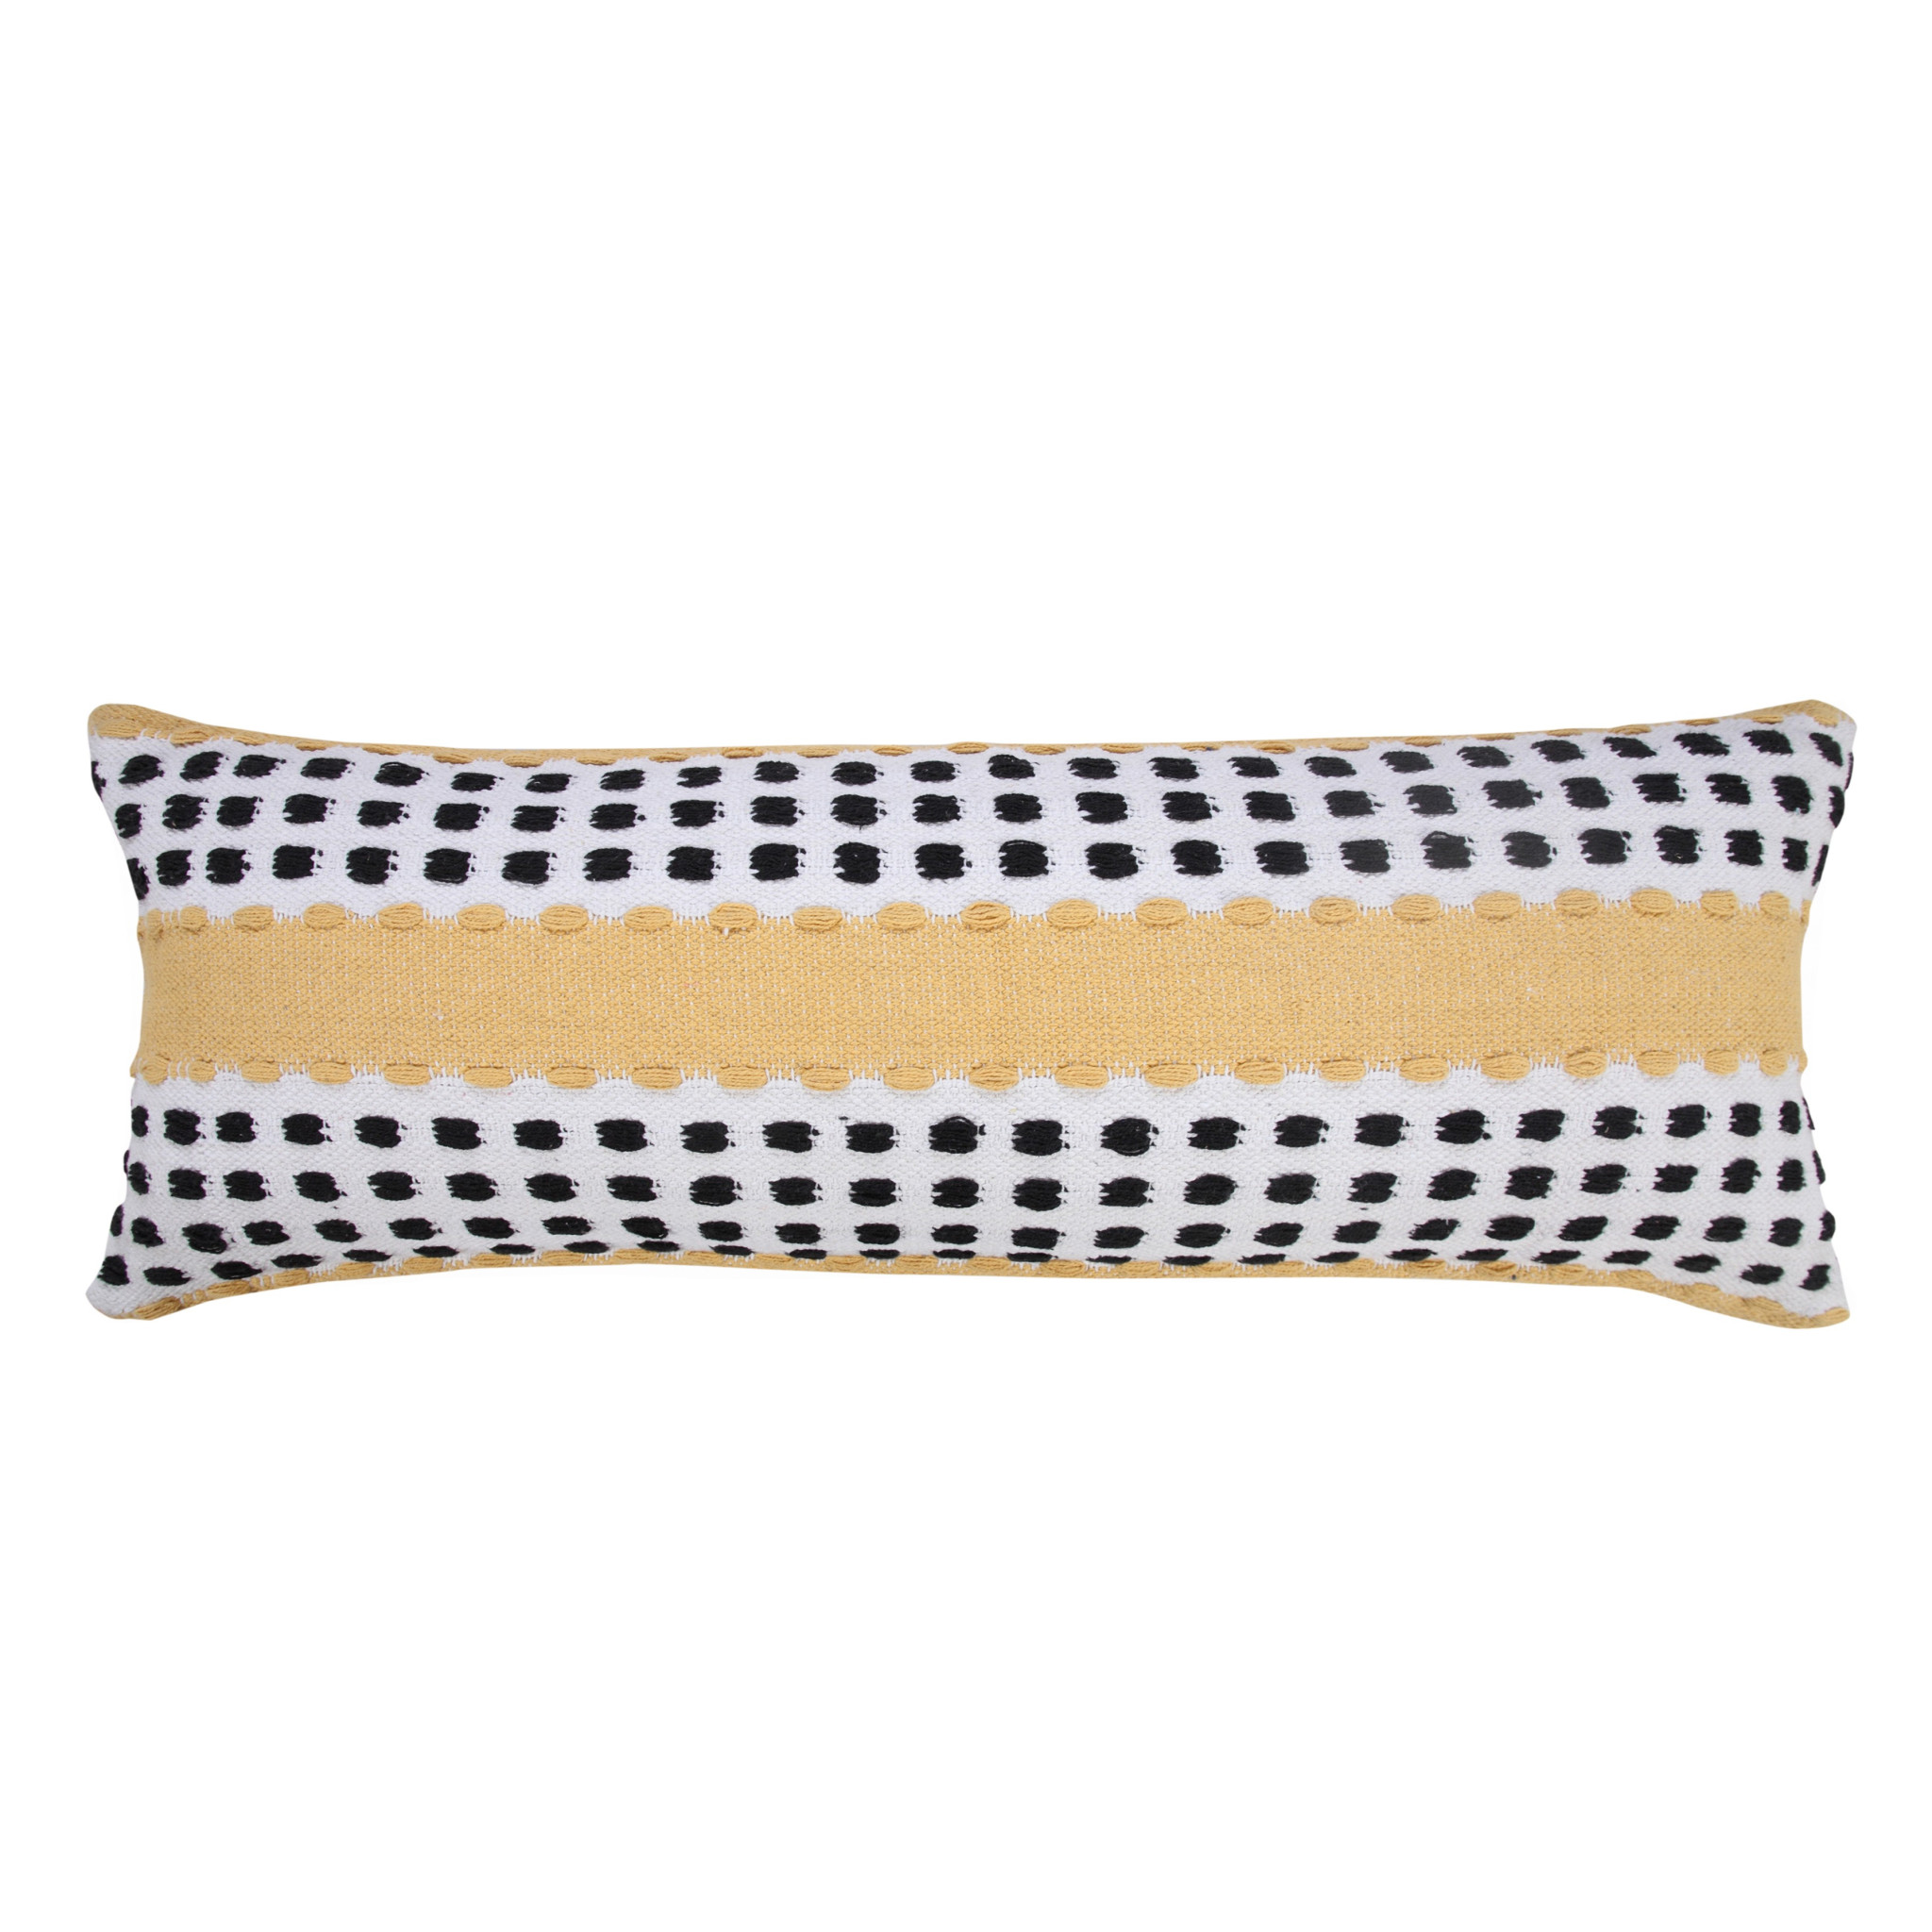 14" X 36" Yellow Black And White 100% Cotton Striped Zippered Pillow-517337-1